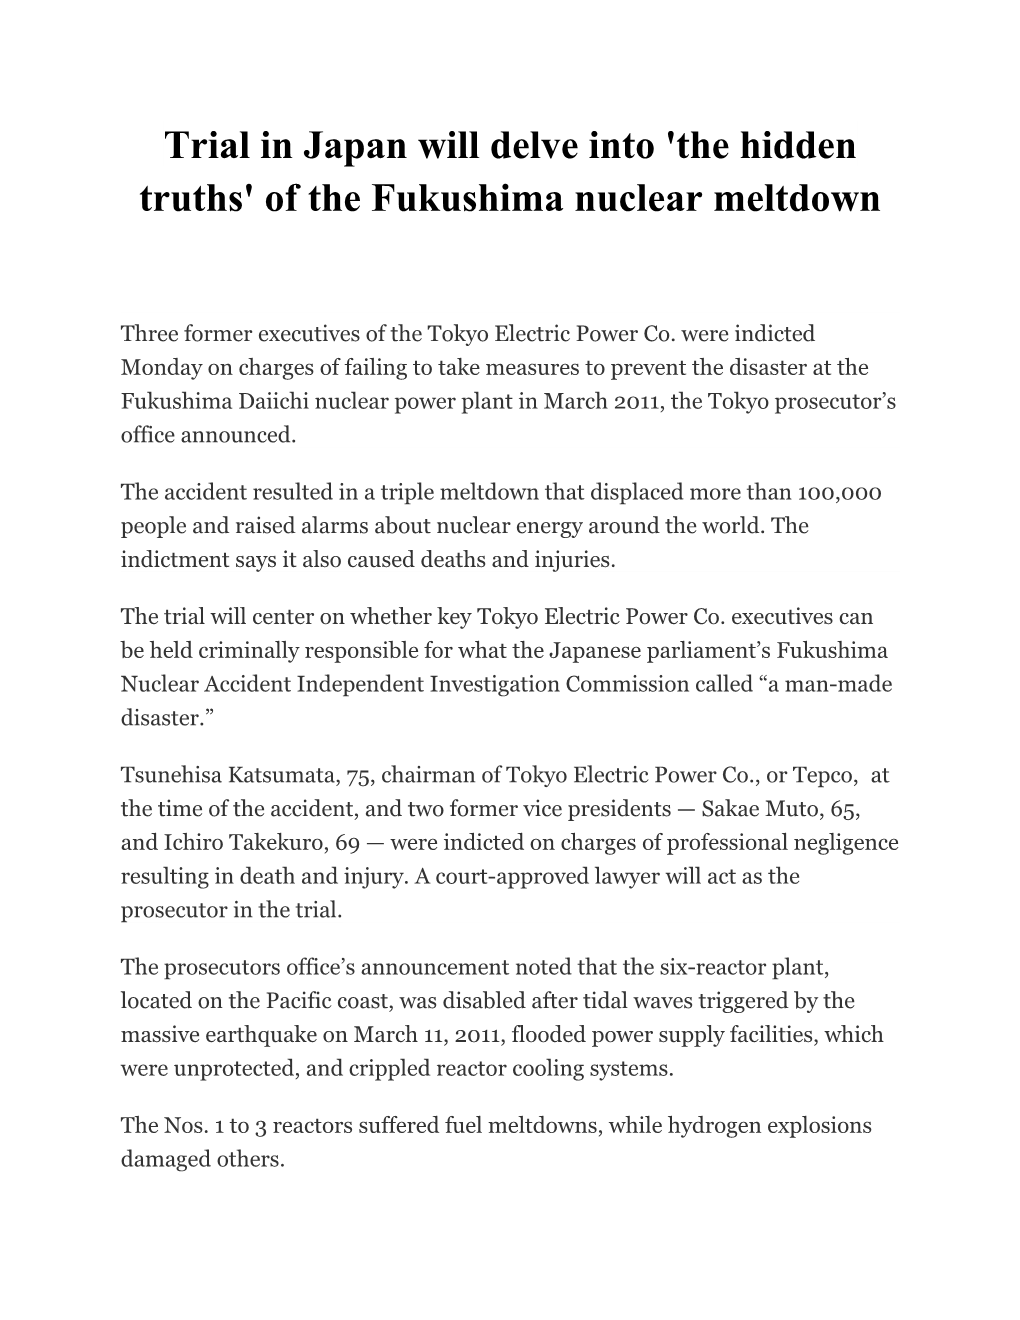 Trial in Japan Will Delve Into 'The Hidden Truths' of the Fukushima Nuclear Meltdown